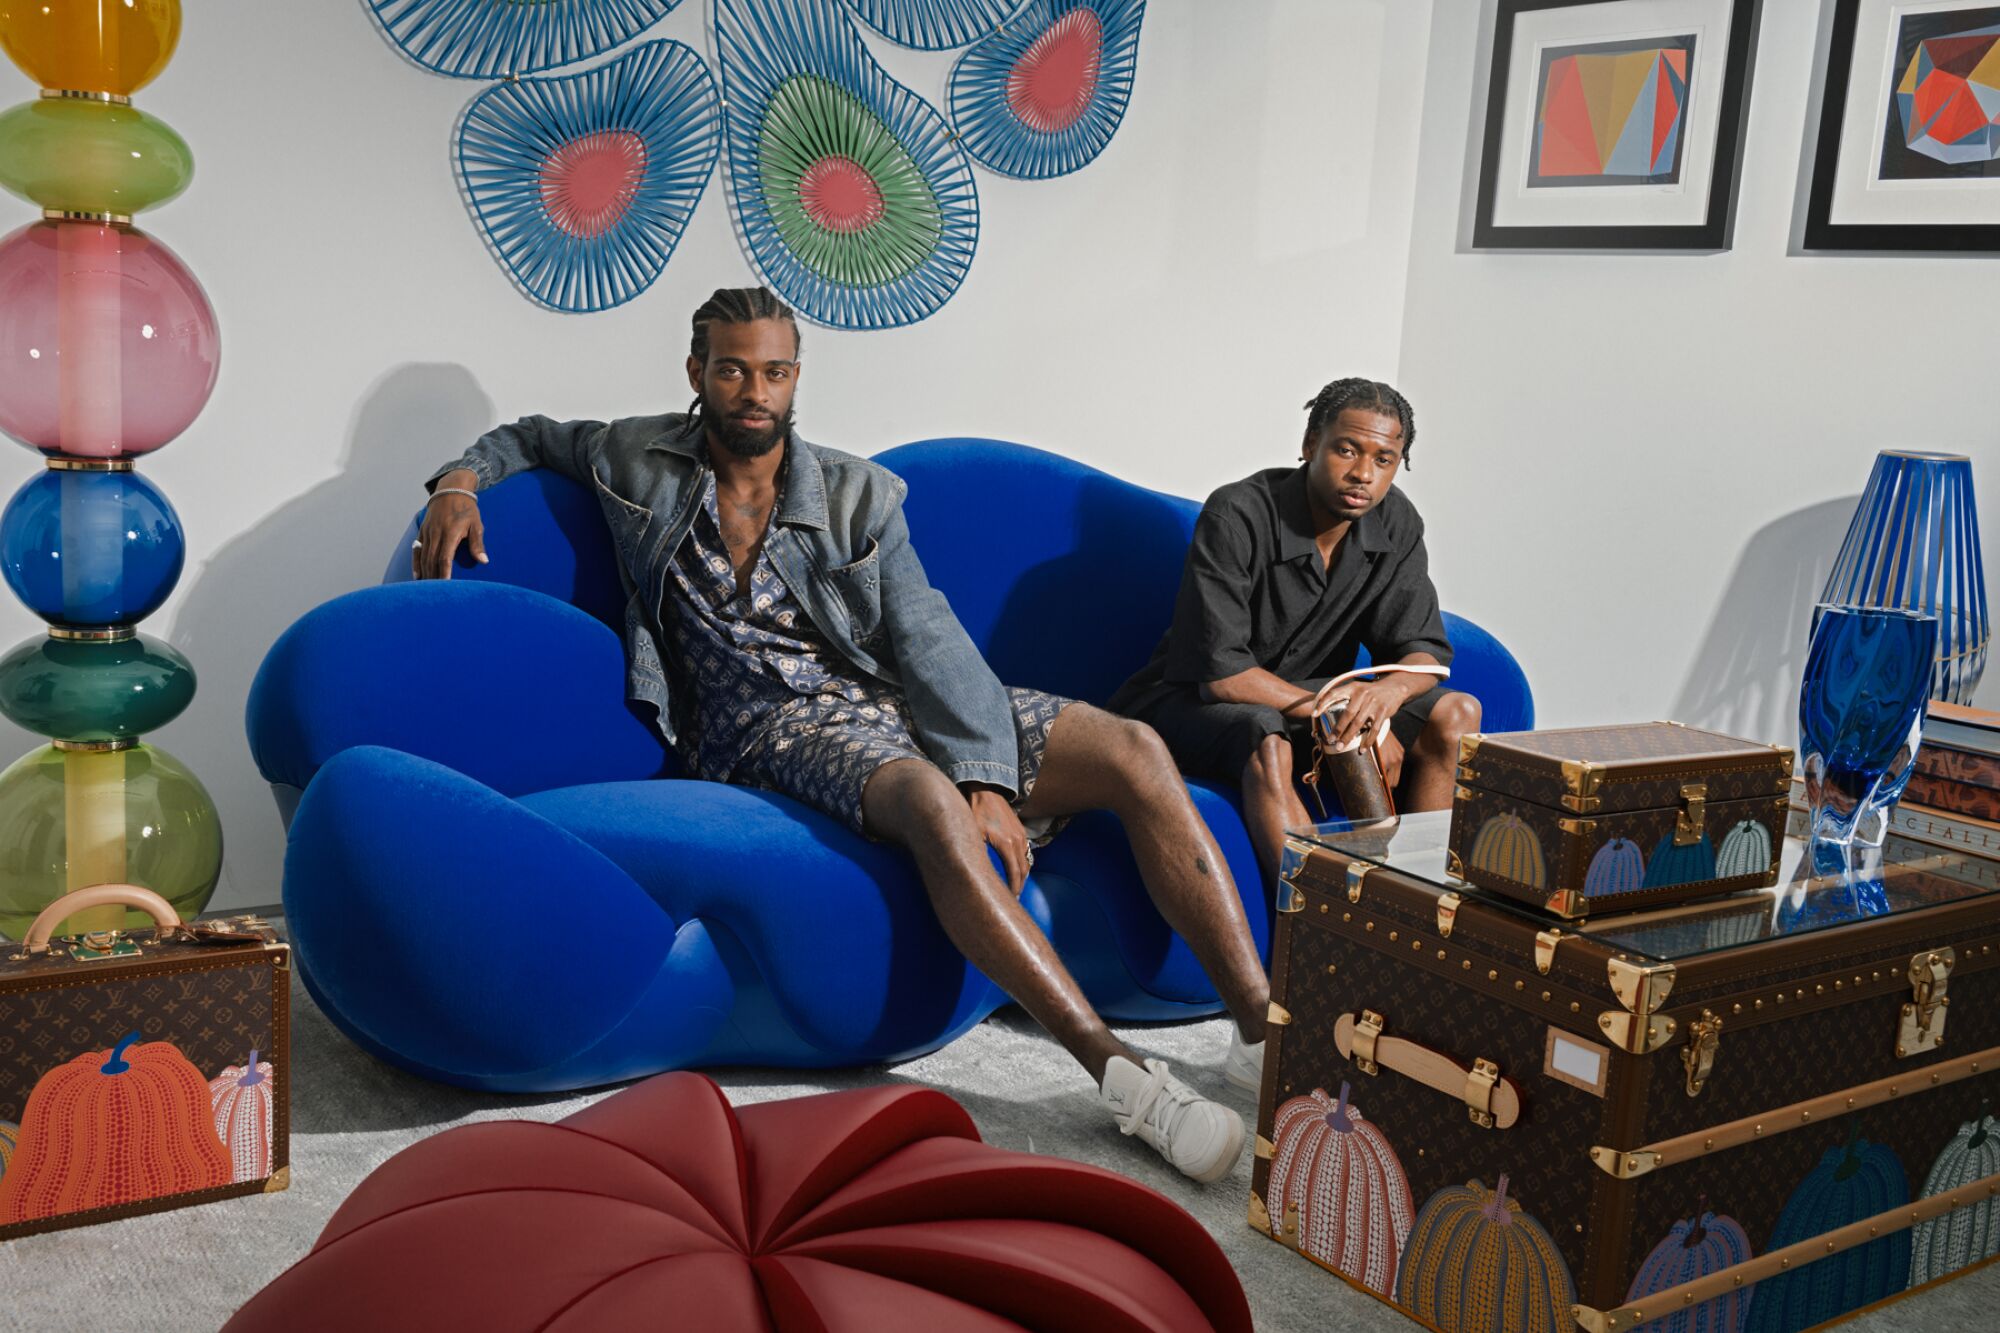 Two people sit on a blue couch in a room with Louis Vuitton suitcases.